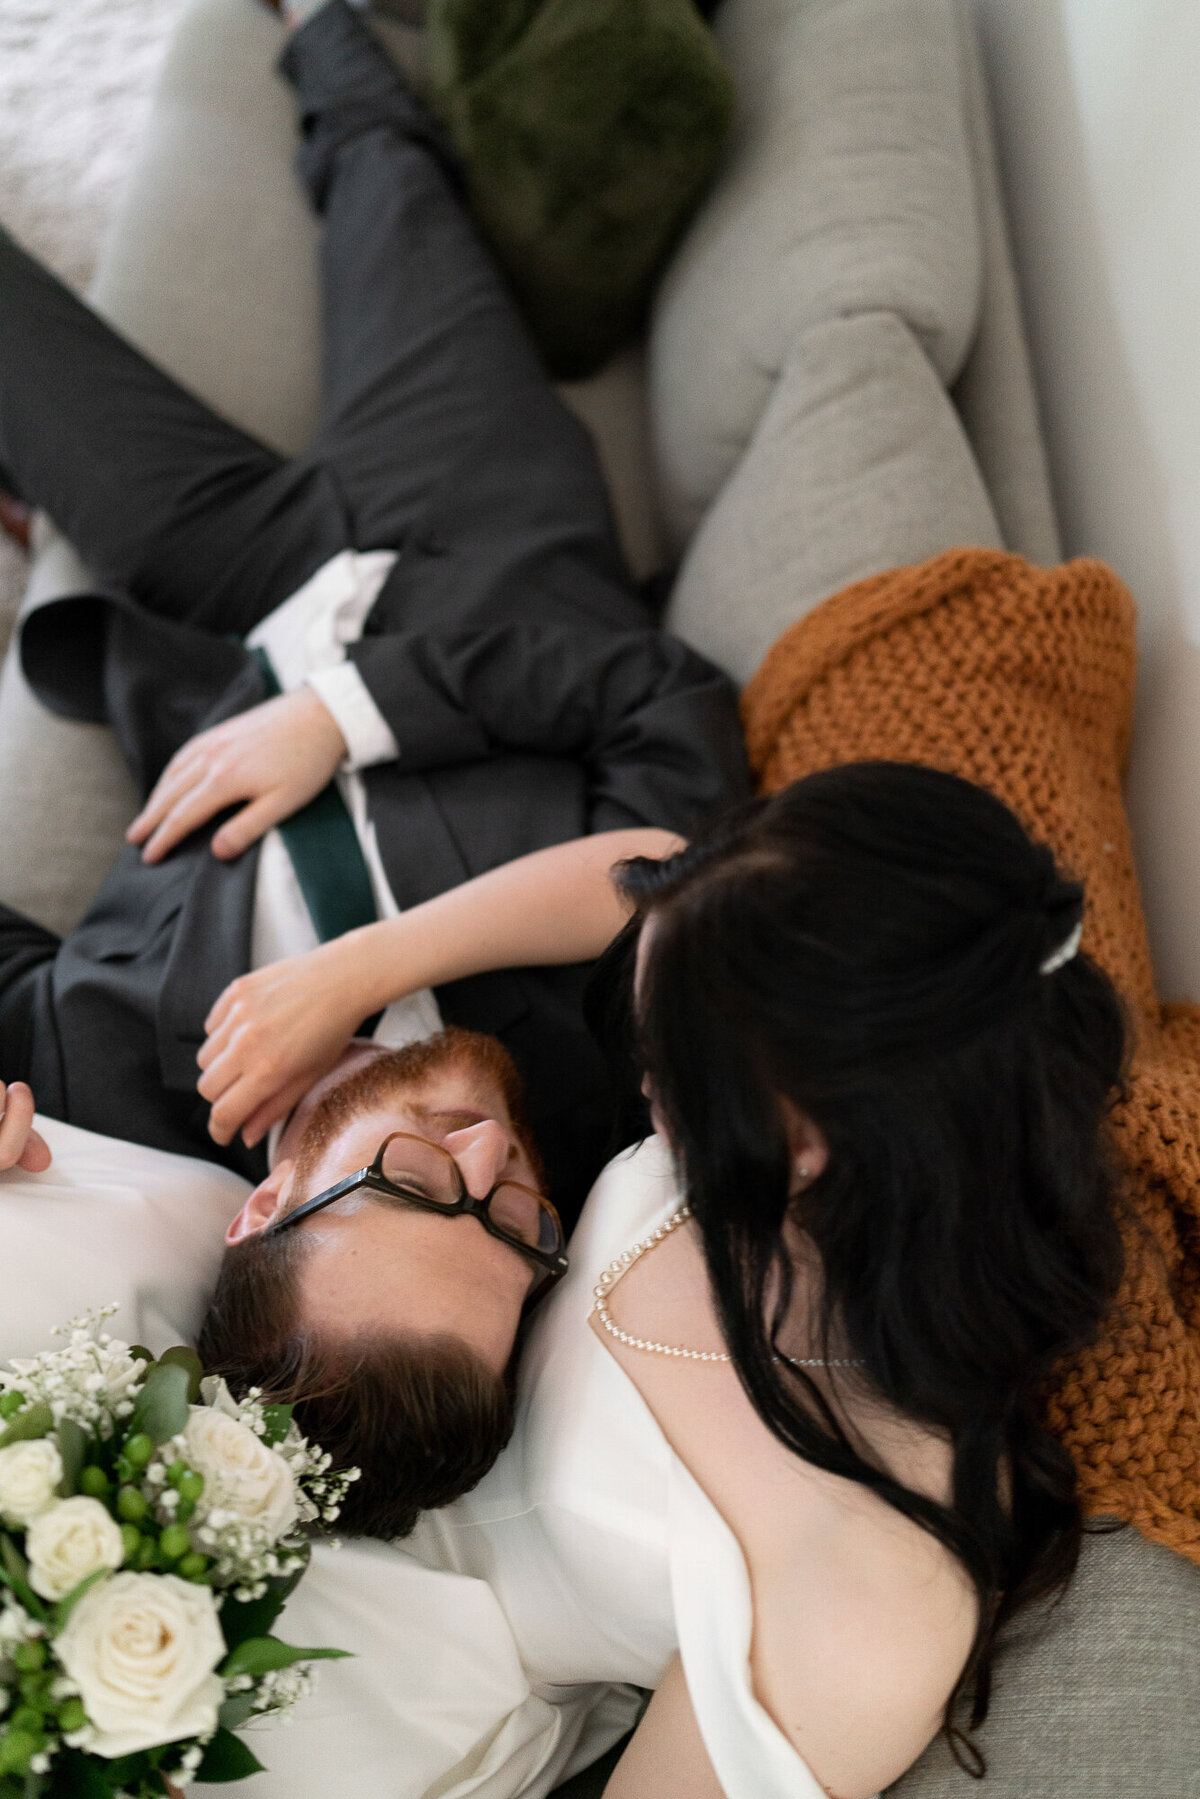 Bride and groom cuddle on the couch.